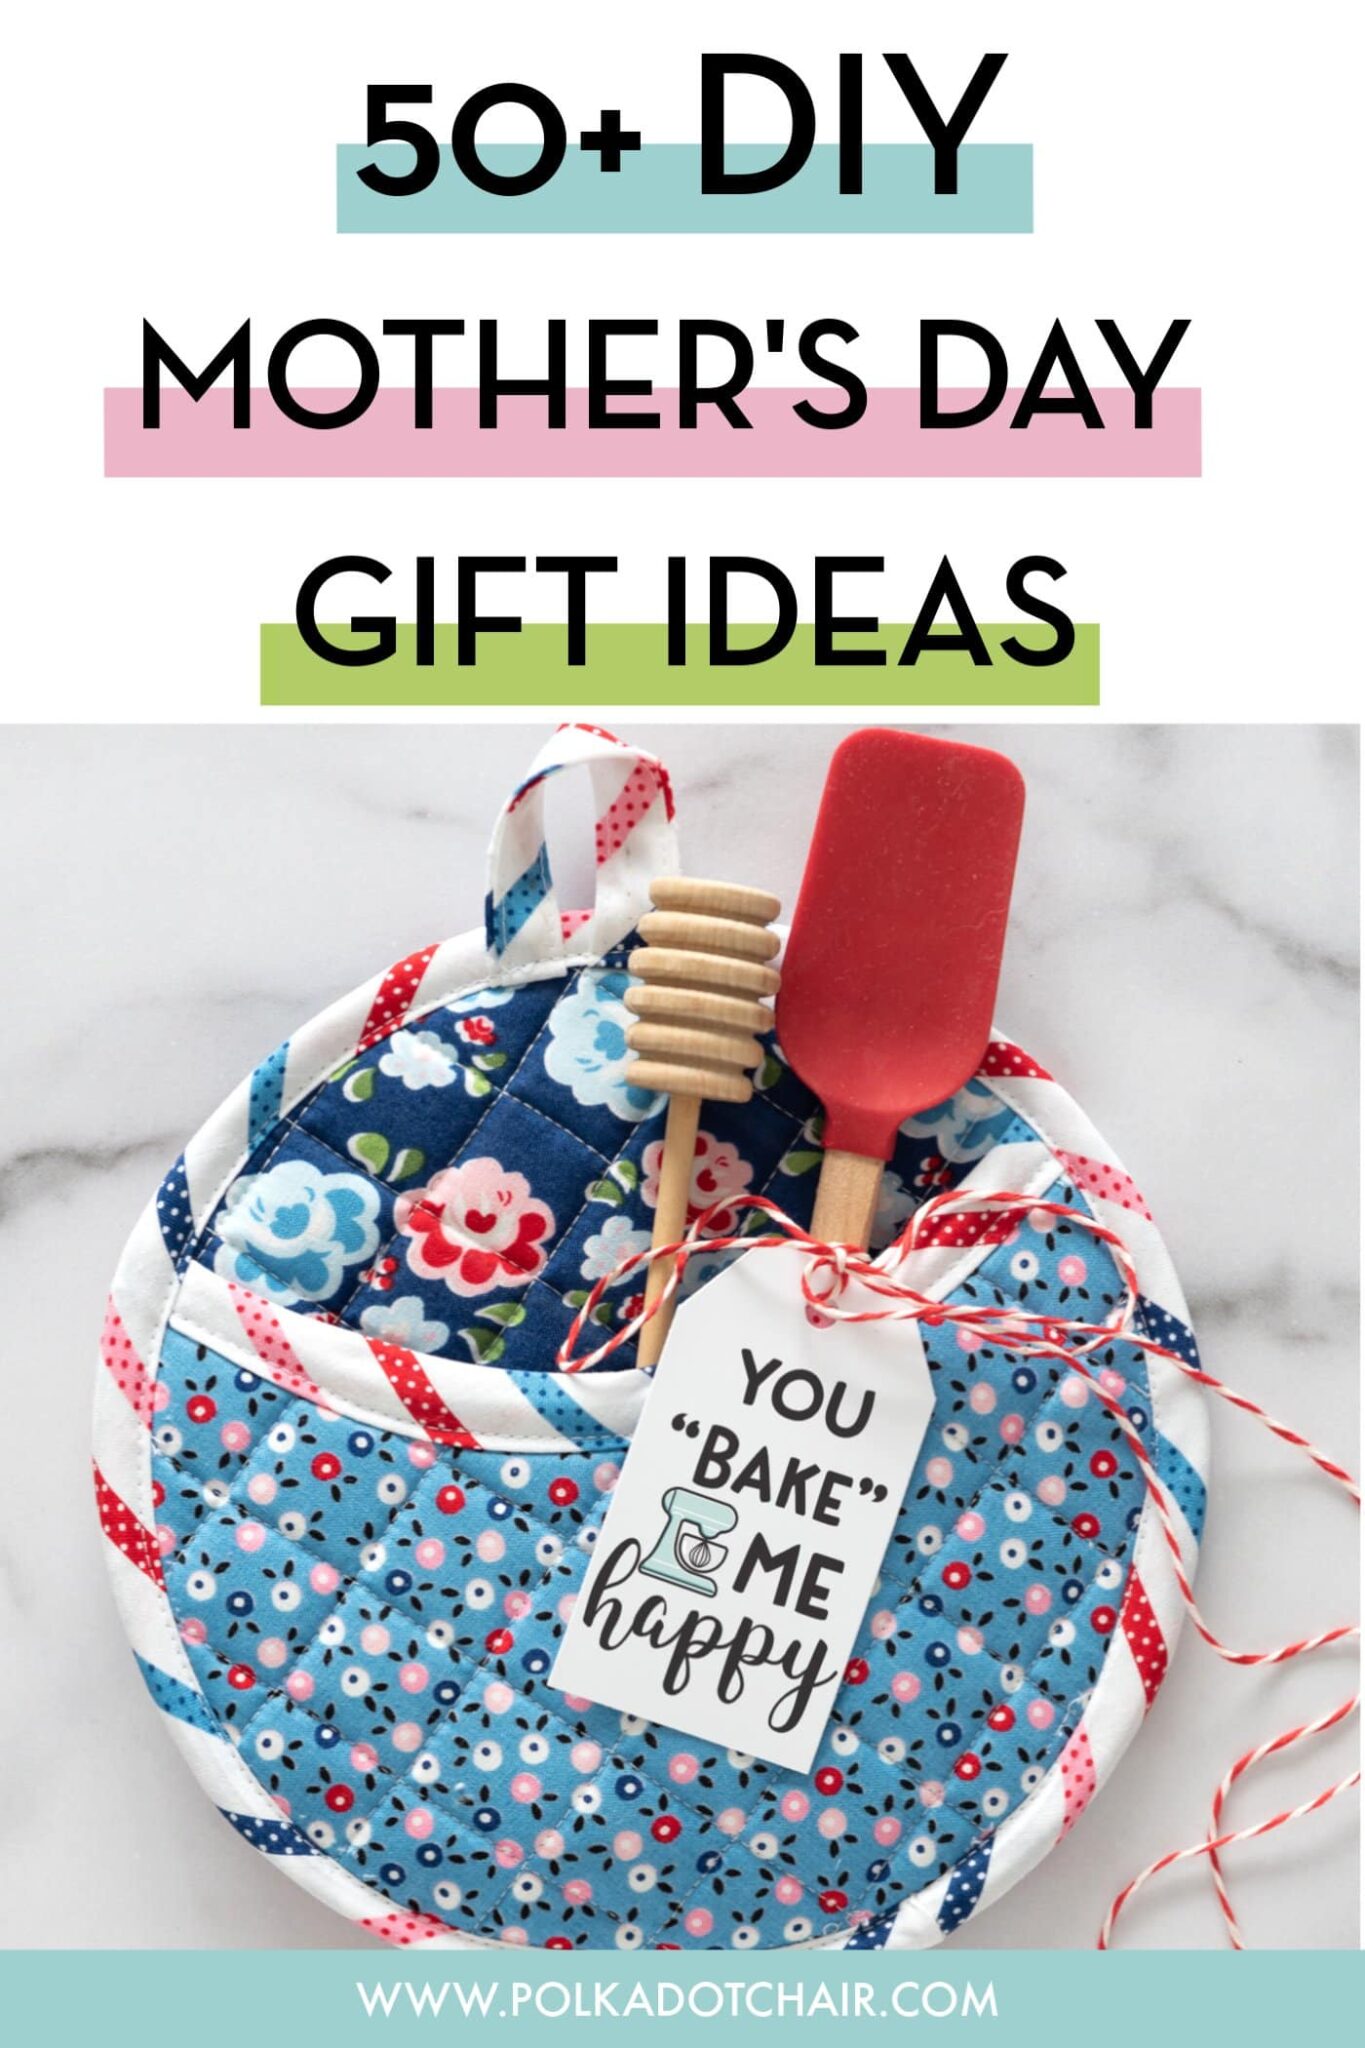 50+ DIY Mother's Day Gift Ideas & Crafts The Polka Dot Chair